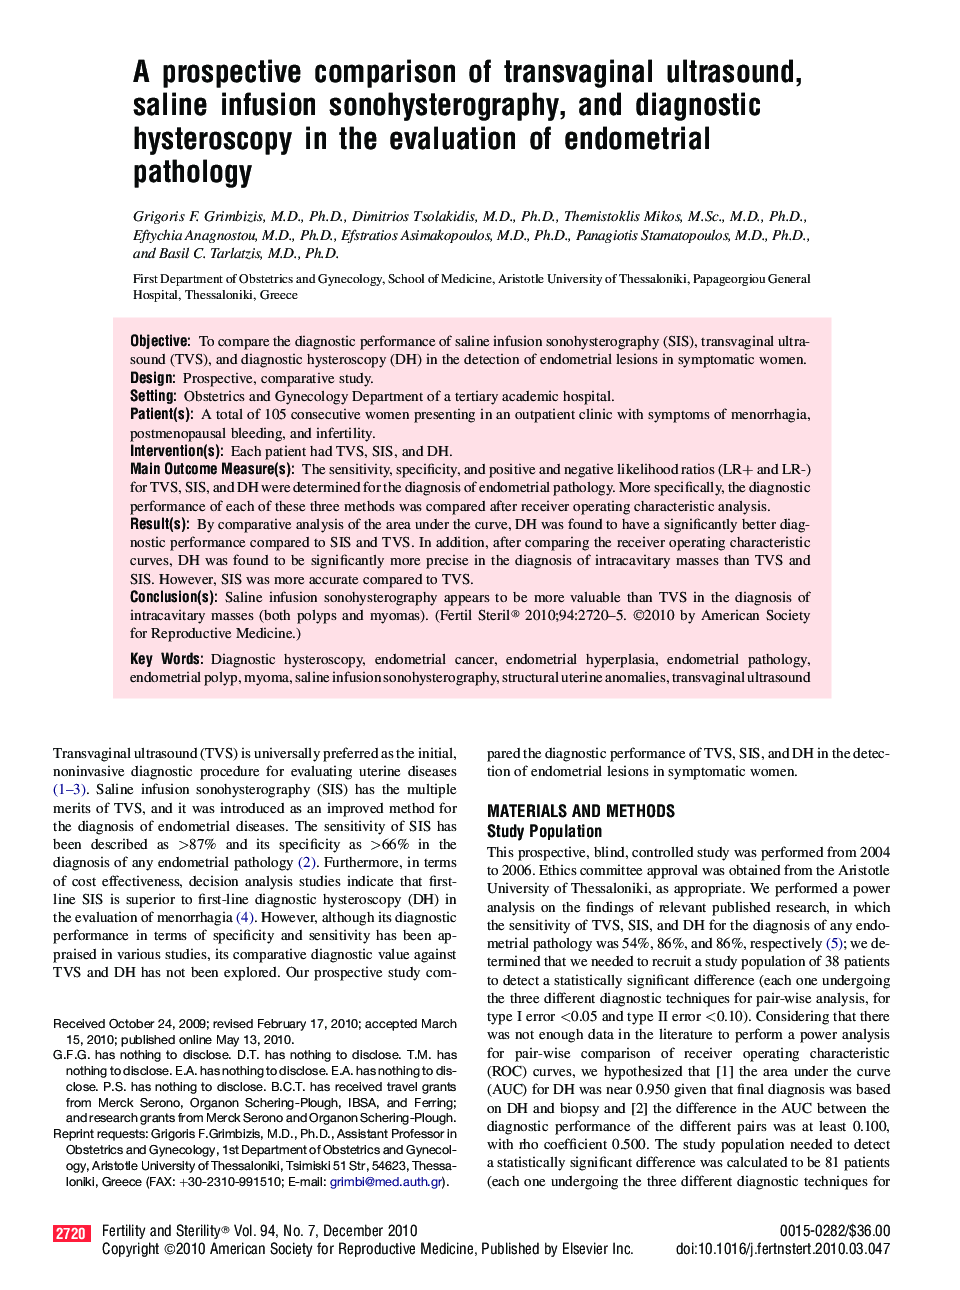 A prospective comparison of transvaginal ultrasound, saline infusion sonohysterography, and diagnostic hysteroscopy in the evaluation of endometrial pathology